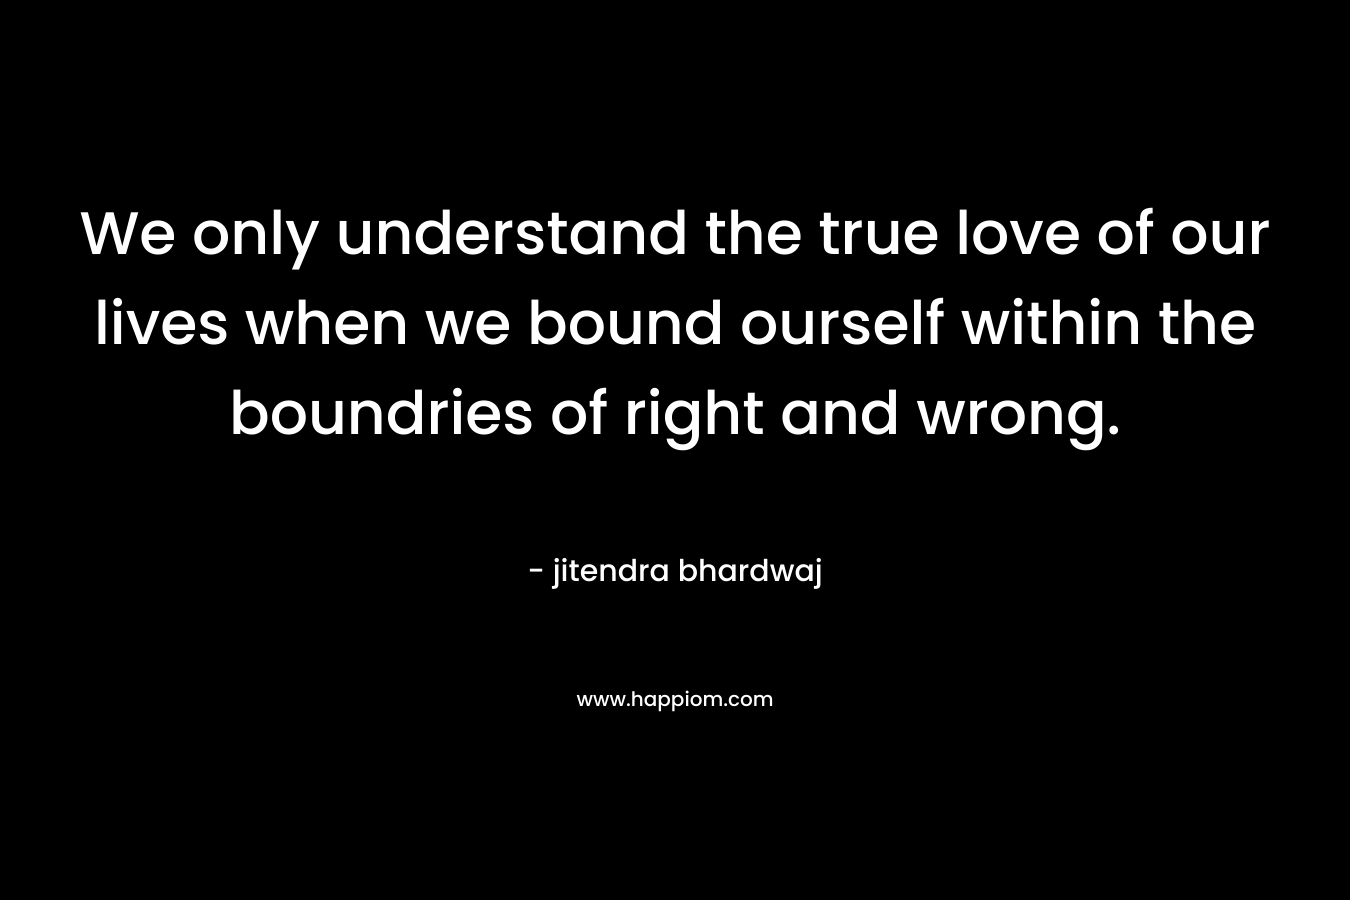 We only understand the true love of our lives when we bound ourself within the boundries of right and wrong.